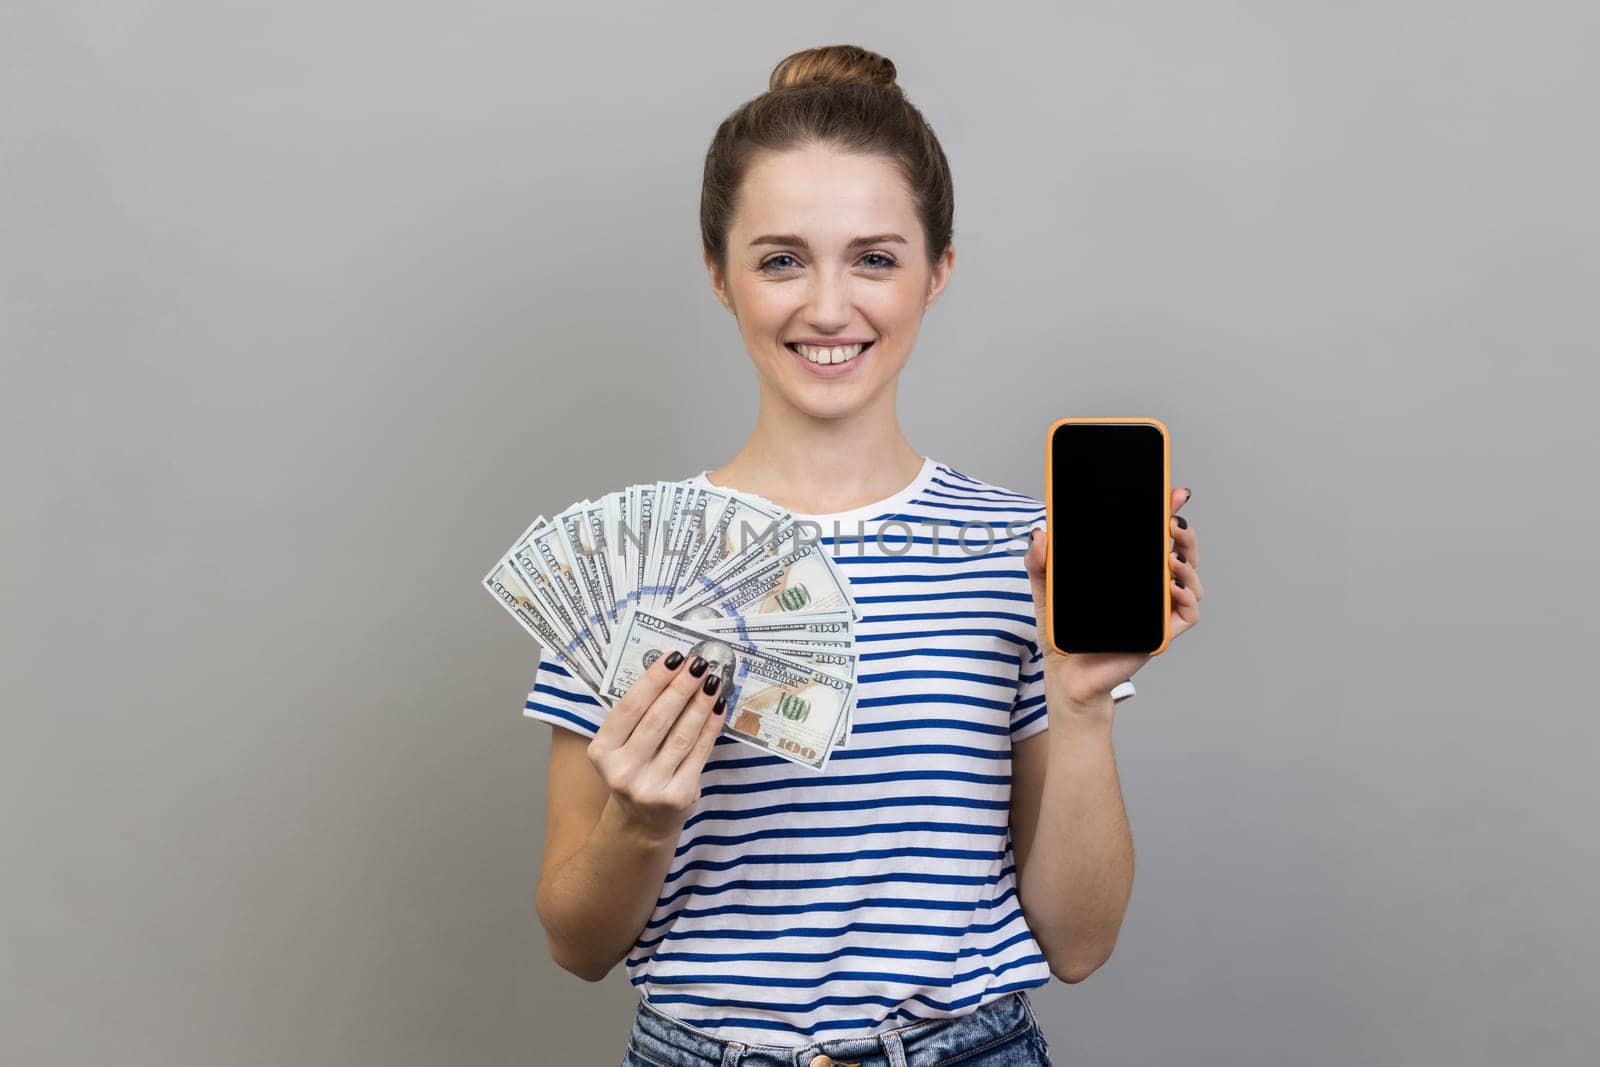 Portrait of delighted satisfied woman wearing striped T-shirt holding in hands smart phone with blank screen and dollars banknotes. Indoor studio shot isolated on gray background.